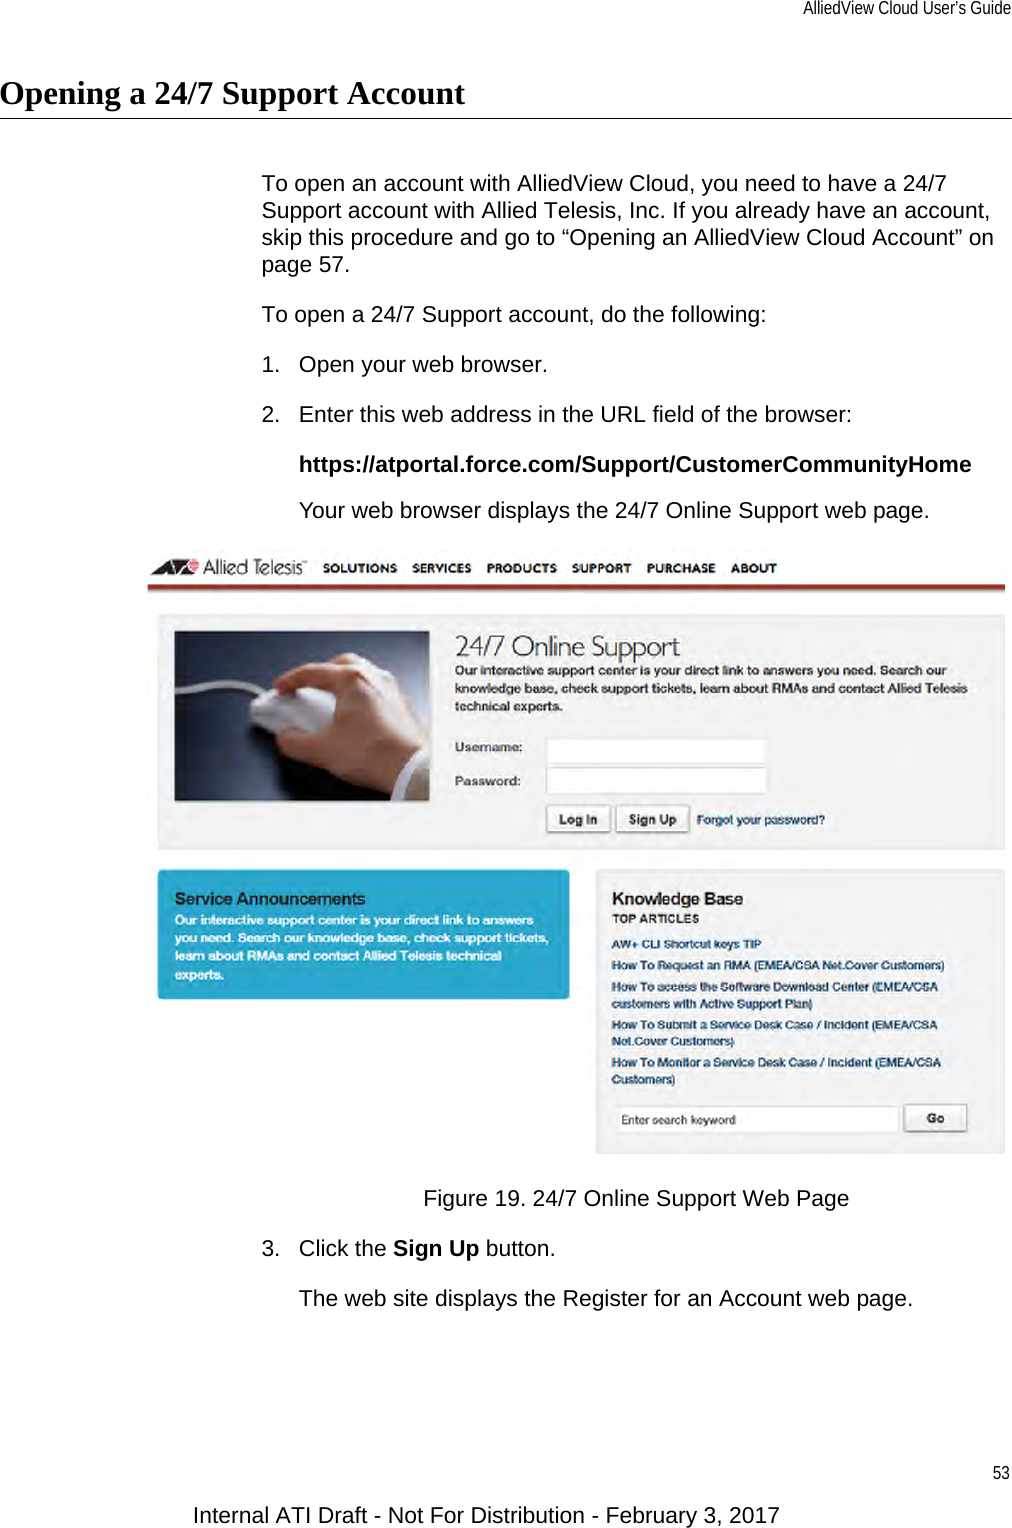 AlliedView Cloud User’s Guide53Opening a 24/7 Support AccountTo open an account with AlliedView Cloud, you need to have a 24/7 Support account with Allied Telesis, Inc. If you already have an account, skip this procedure and go to “Opening an AlliedView Cloud Account” on page 57.To open a 24/7 Support account, do the following:1. Open your web browser.2. Enter this web address in the URL field of the browser:https://atportal.force.com/Support/CustomerCommunityHomeYour web browser displays the 24/7 Online Support web page.Figure 19. 24/7 Online Support Web Page3. Click the Sign Up button.The web site displays the Register for an Account web page.Internal ATI Draft - Not For Distribution - February 3, 2017